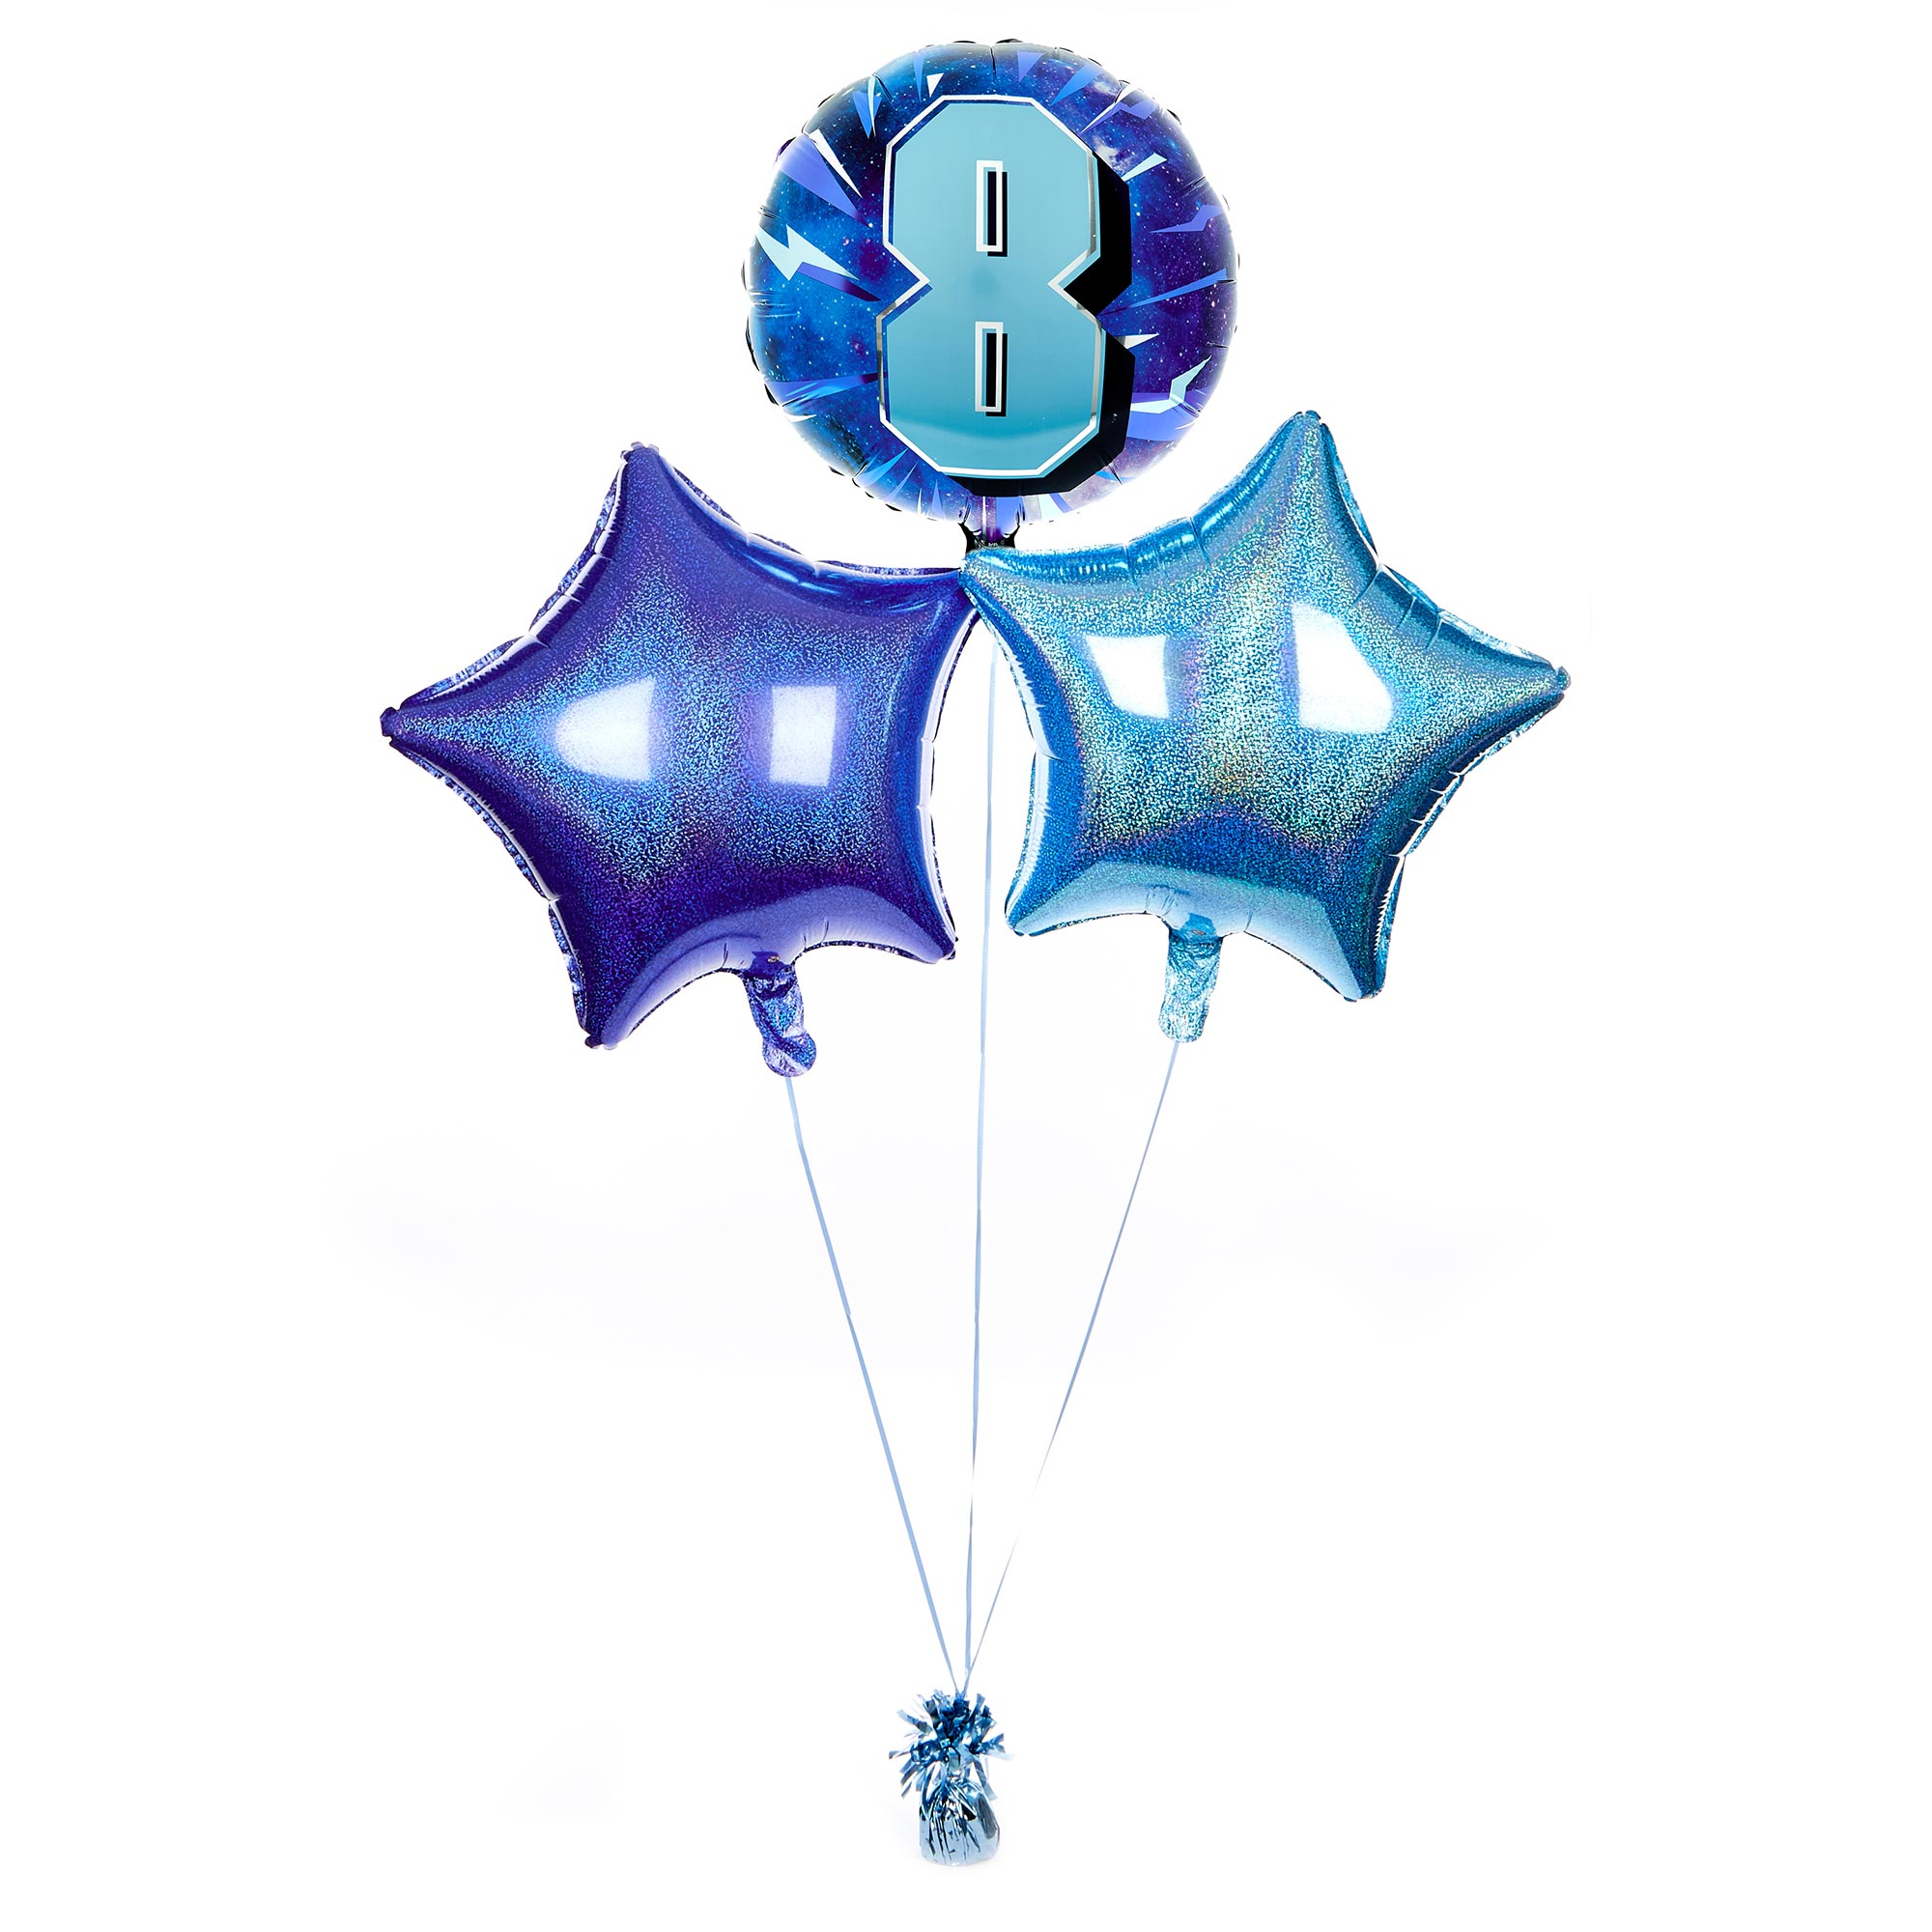 Blue 8th Birthday Balloon Bouquet - DELIVERED INFLATED!